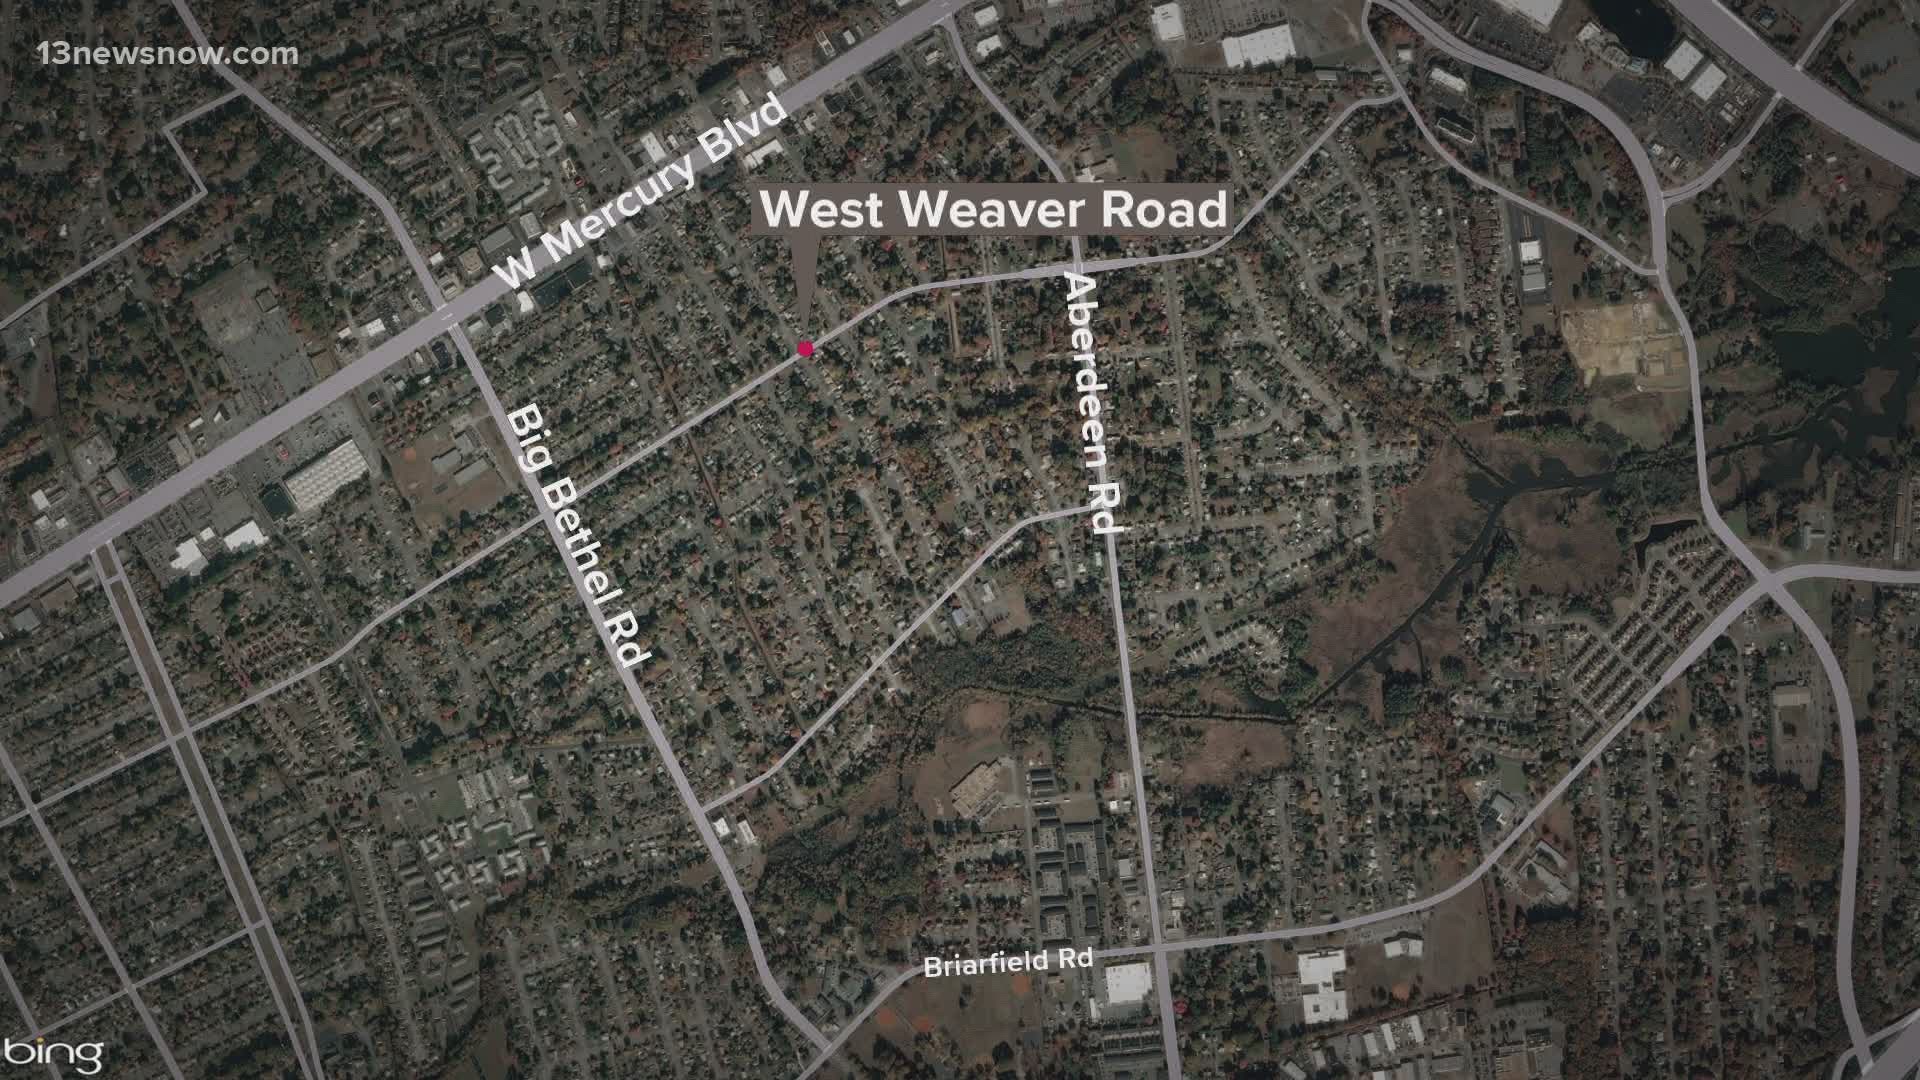 Police said the man was walking in the area of 3000 block of West Weaver Road near West Mercury Boulevard when he was shot.